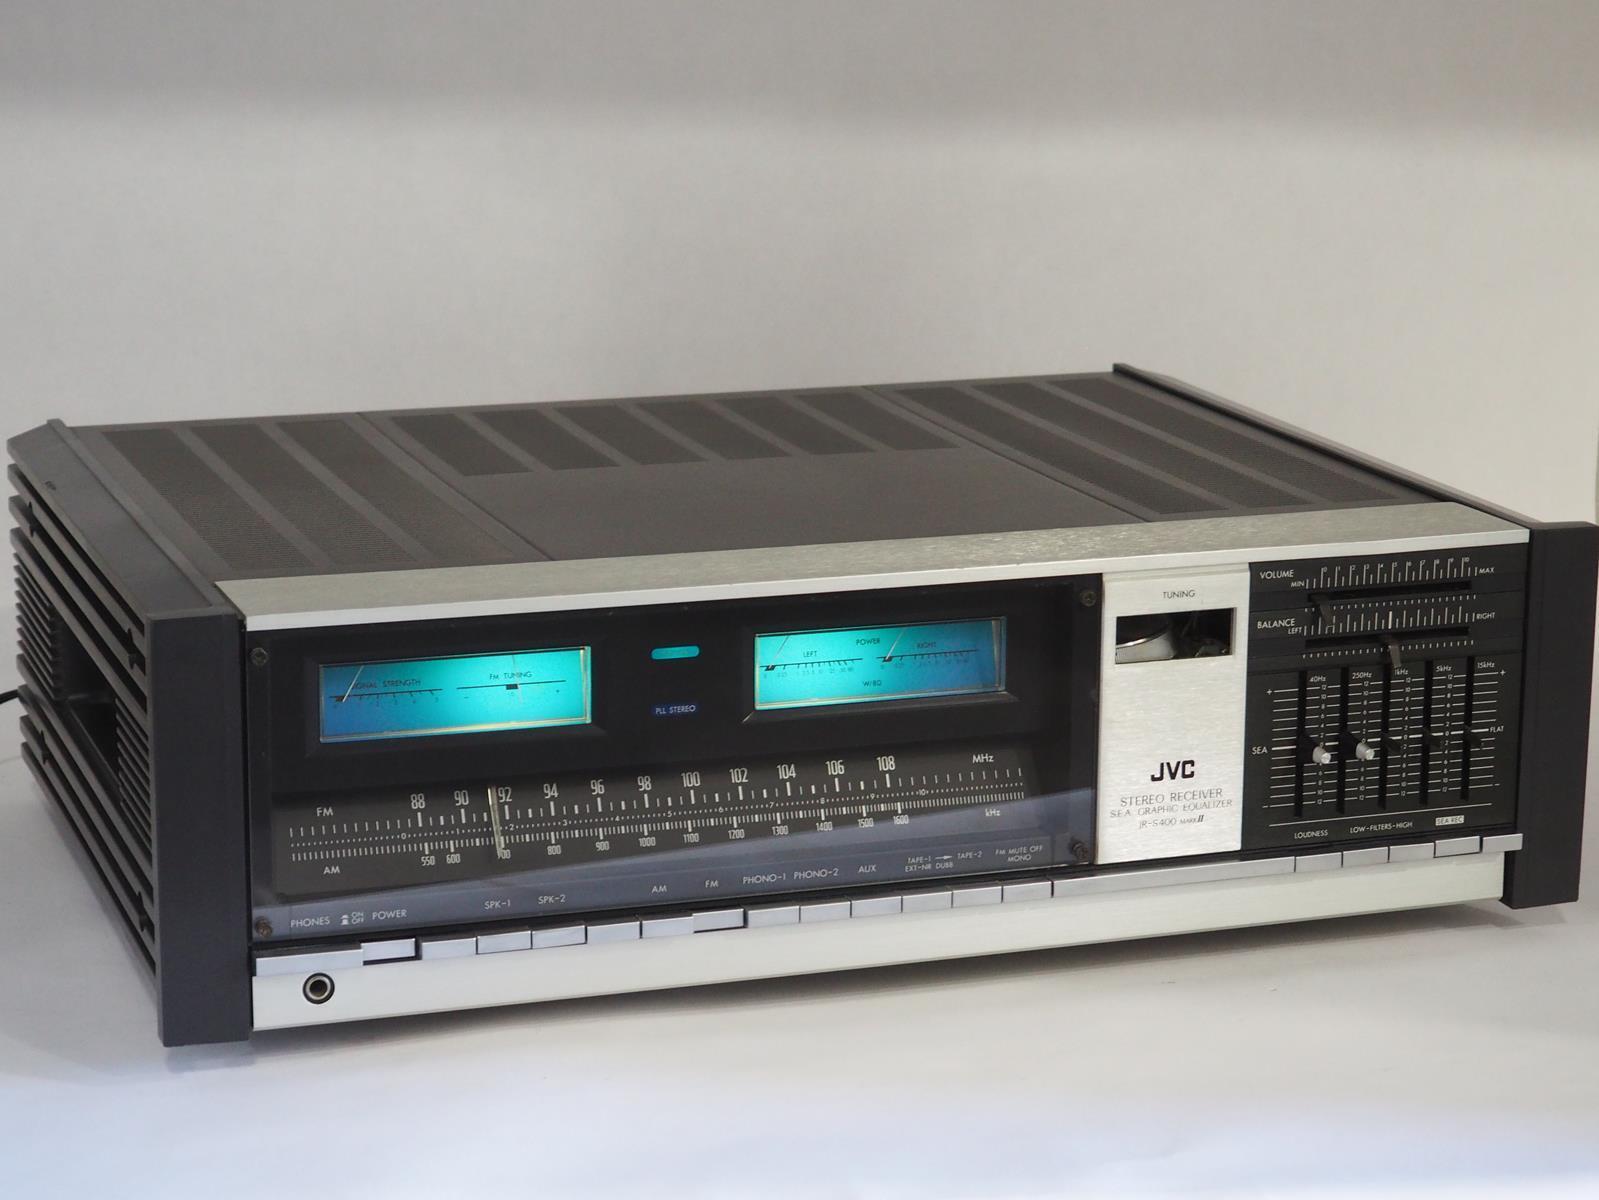 Vintage JVC JR-S400 AM-FM Stereo Receiver *Has Issues,Please Read* FreeShipping